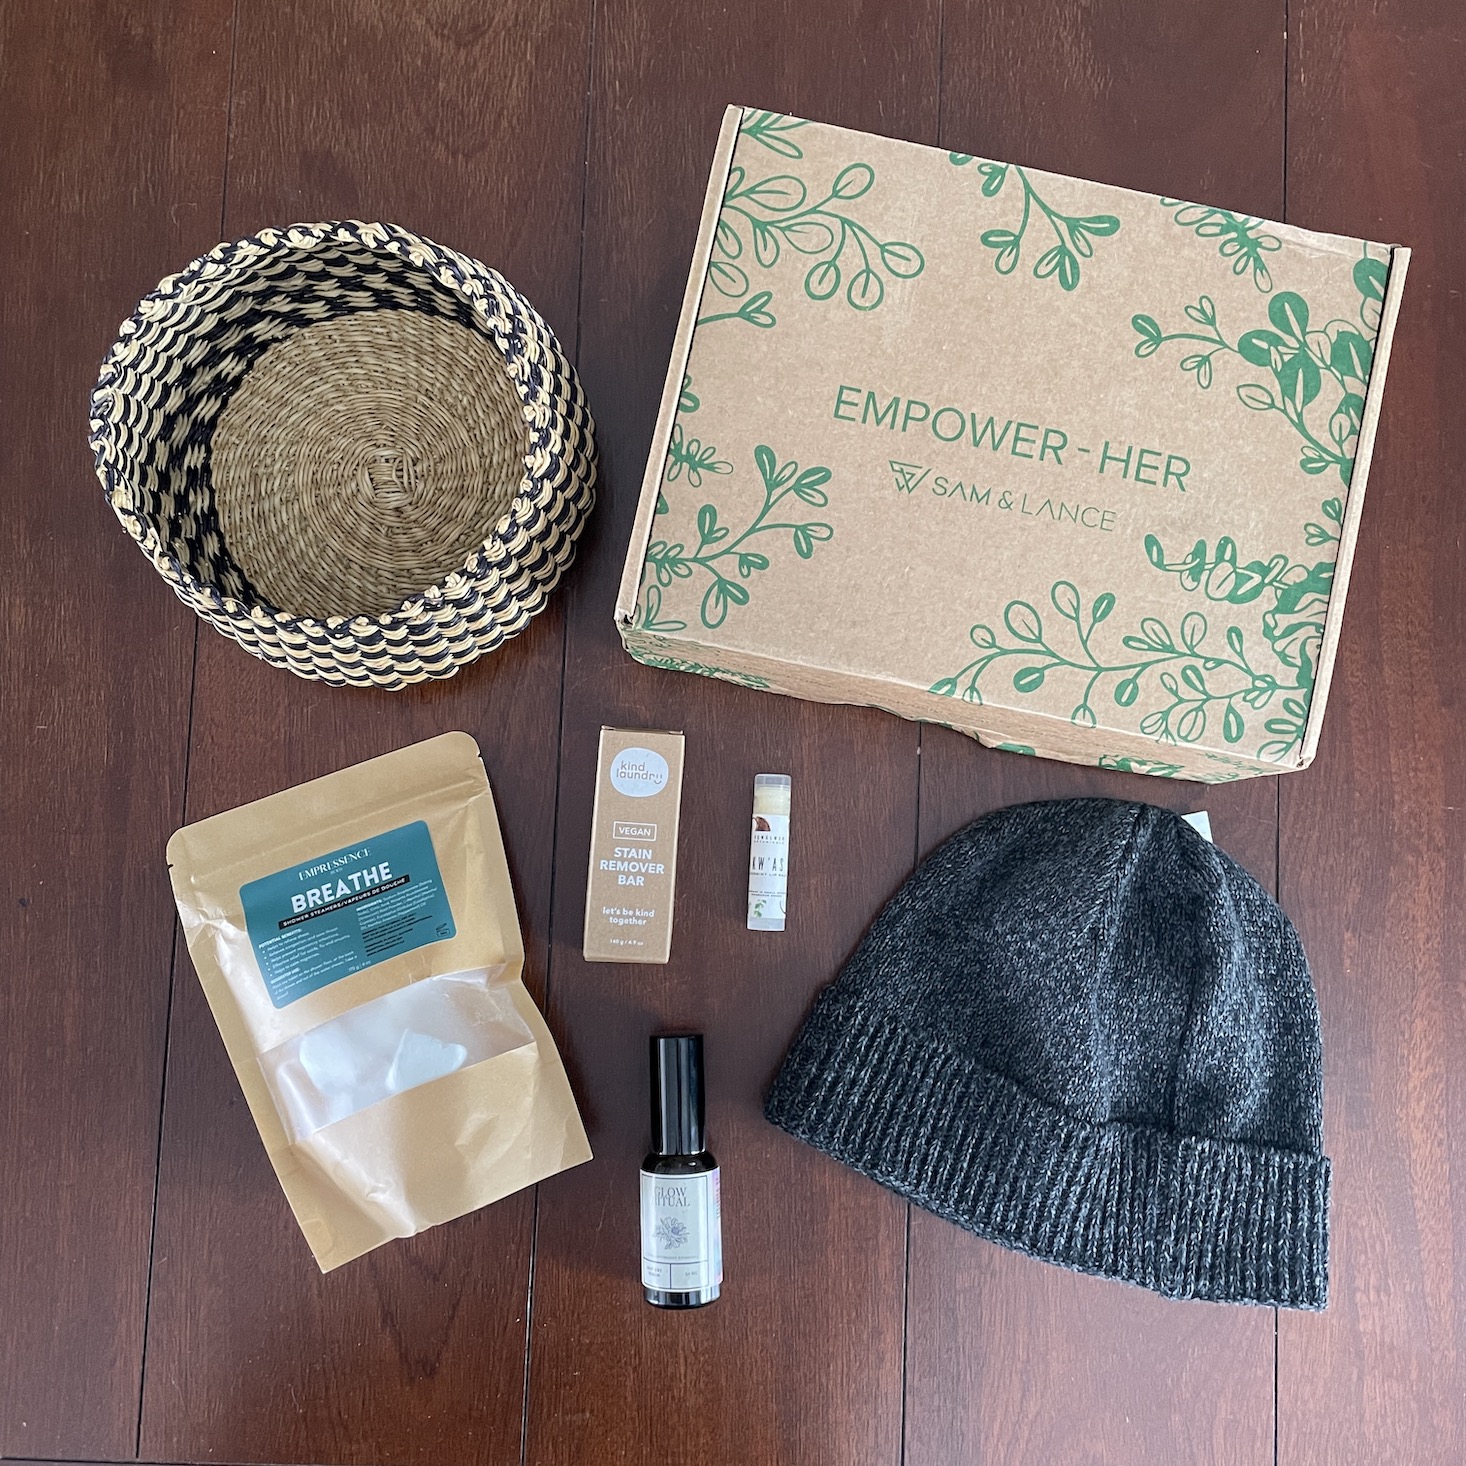 SAM & LANCE Empower-Her Winter 2022 Subscription Box Review